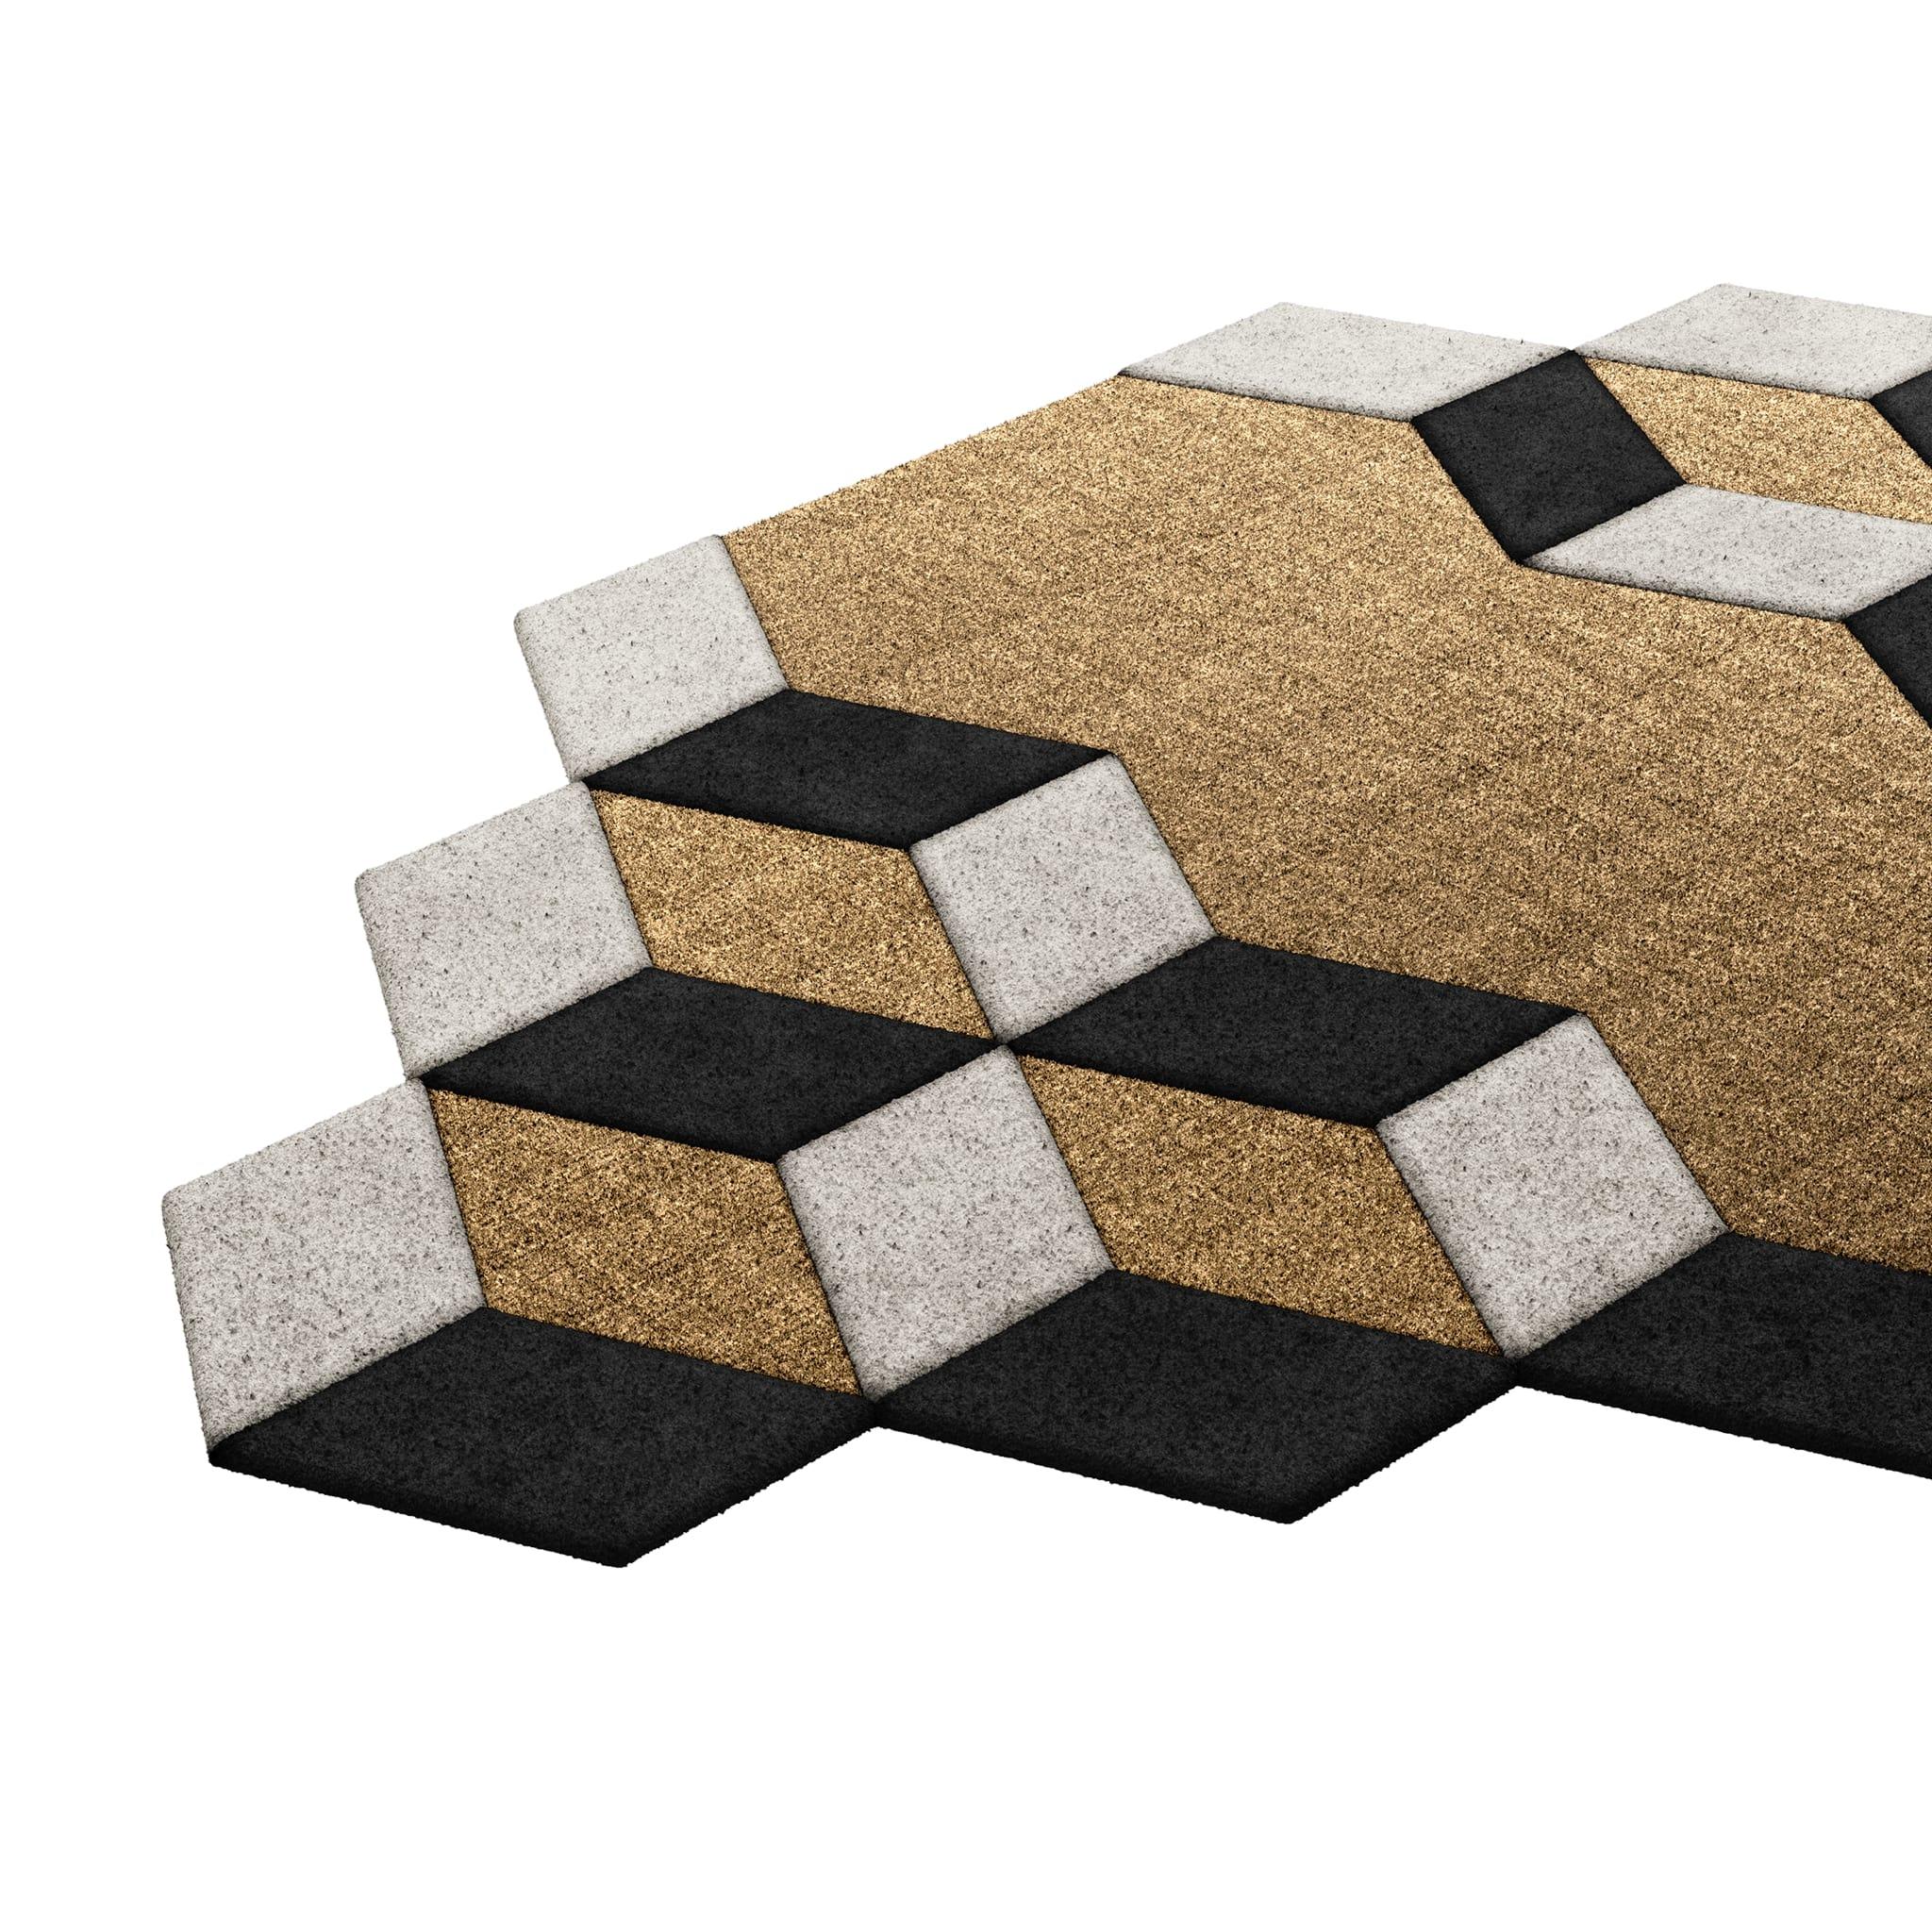 Tapis Retro #005 is a retro rug with an irregular shape and neutral colors. Inspired by architectural lines, this geometric rug makes a statement in any living space. 

Using a 3D-tufted technique that combines cut and loop pile, the retro rug with